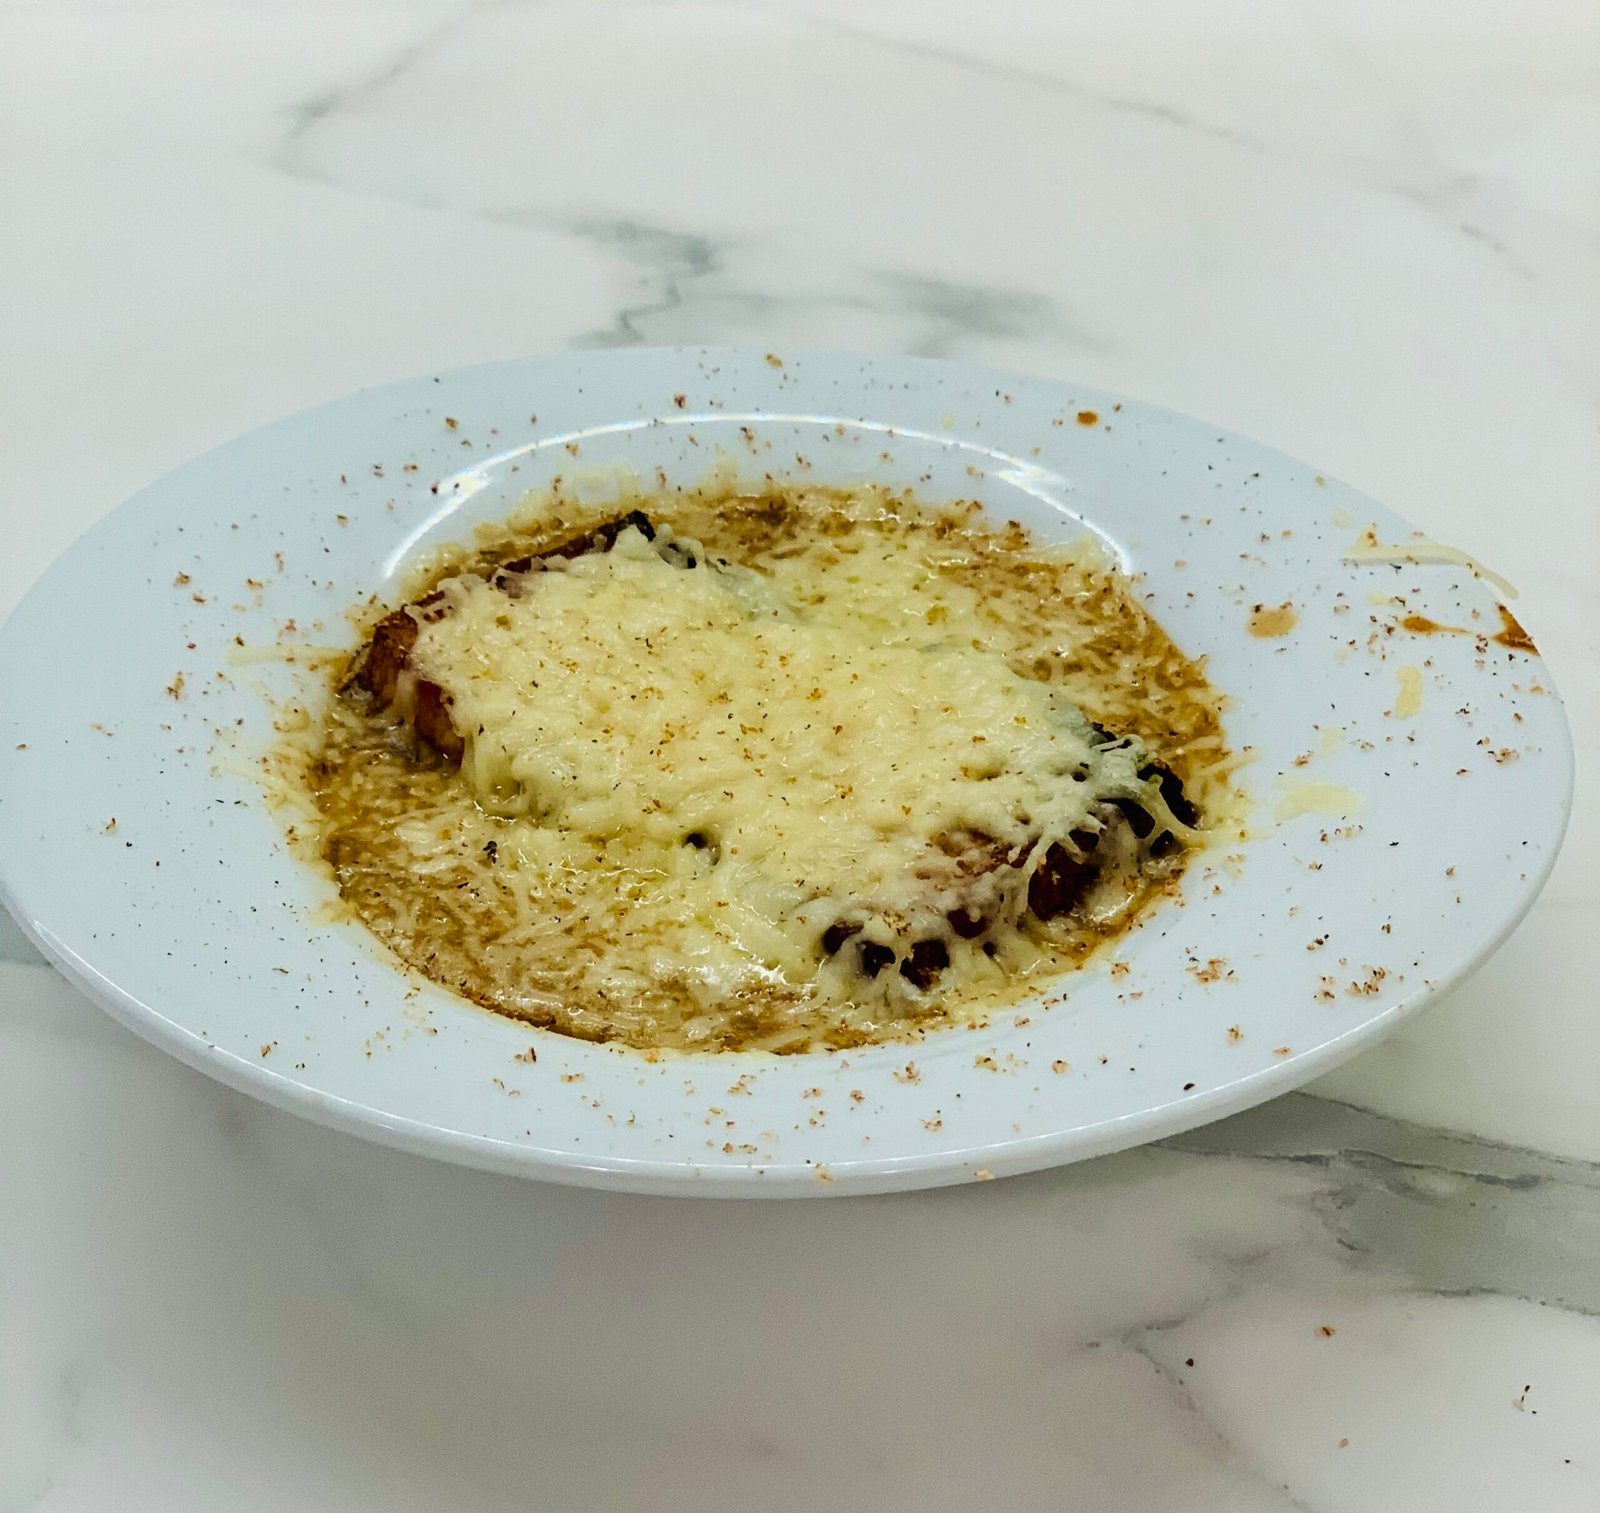 Authentic French onion soup, recipe step by step